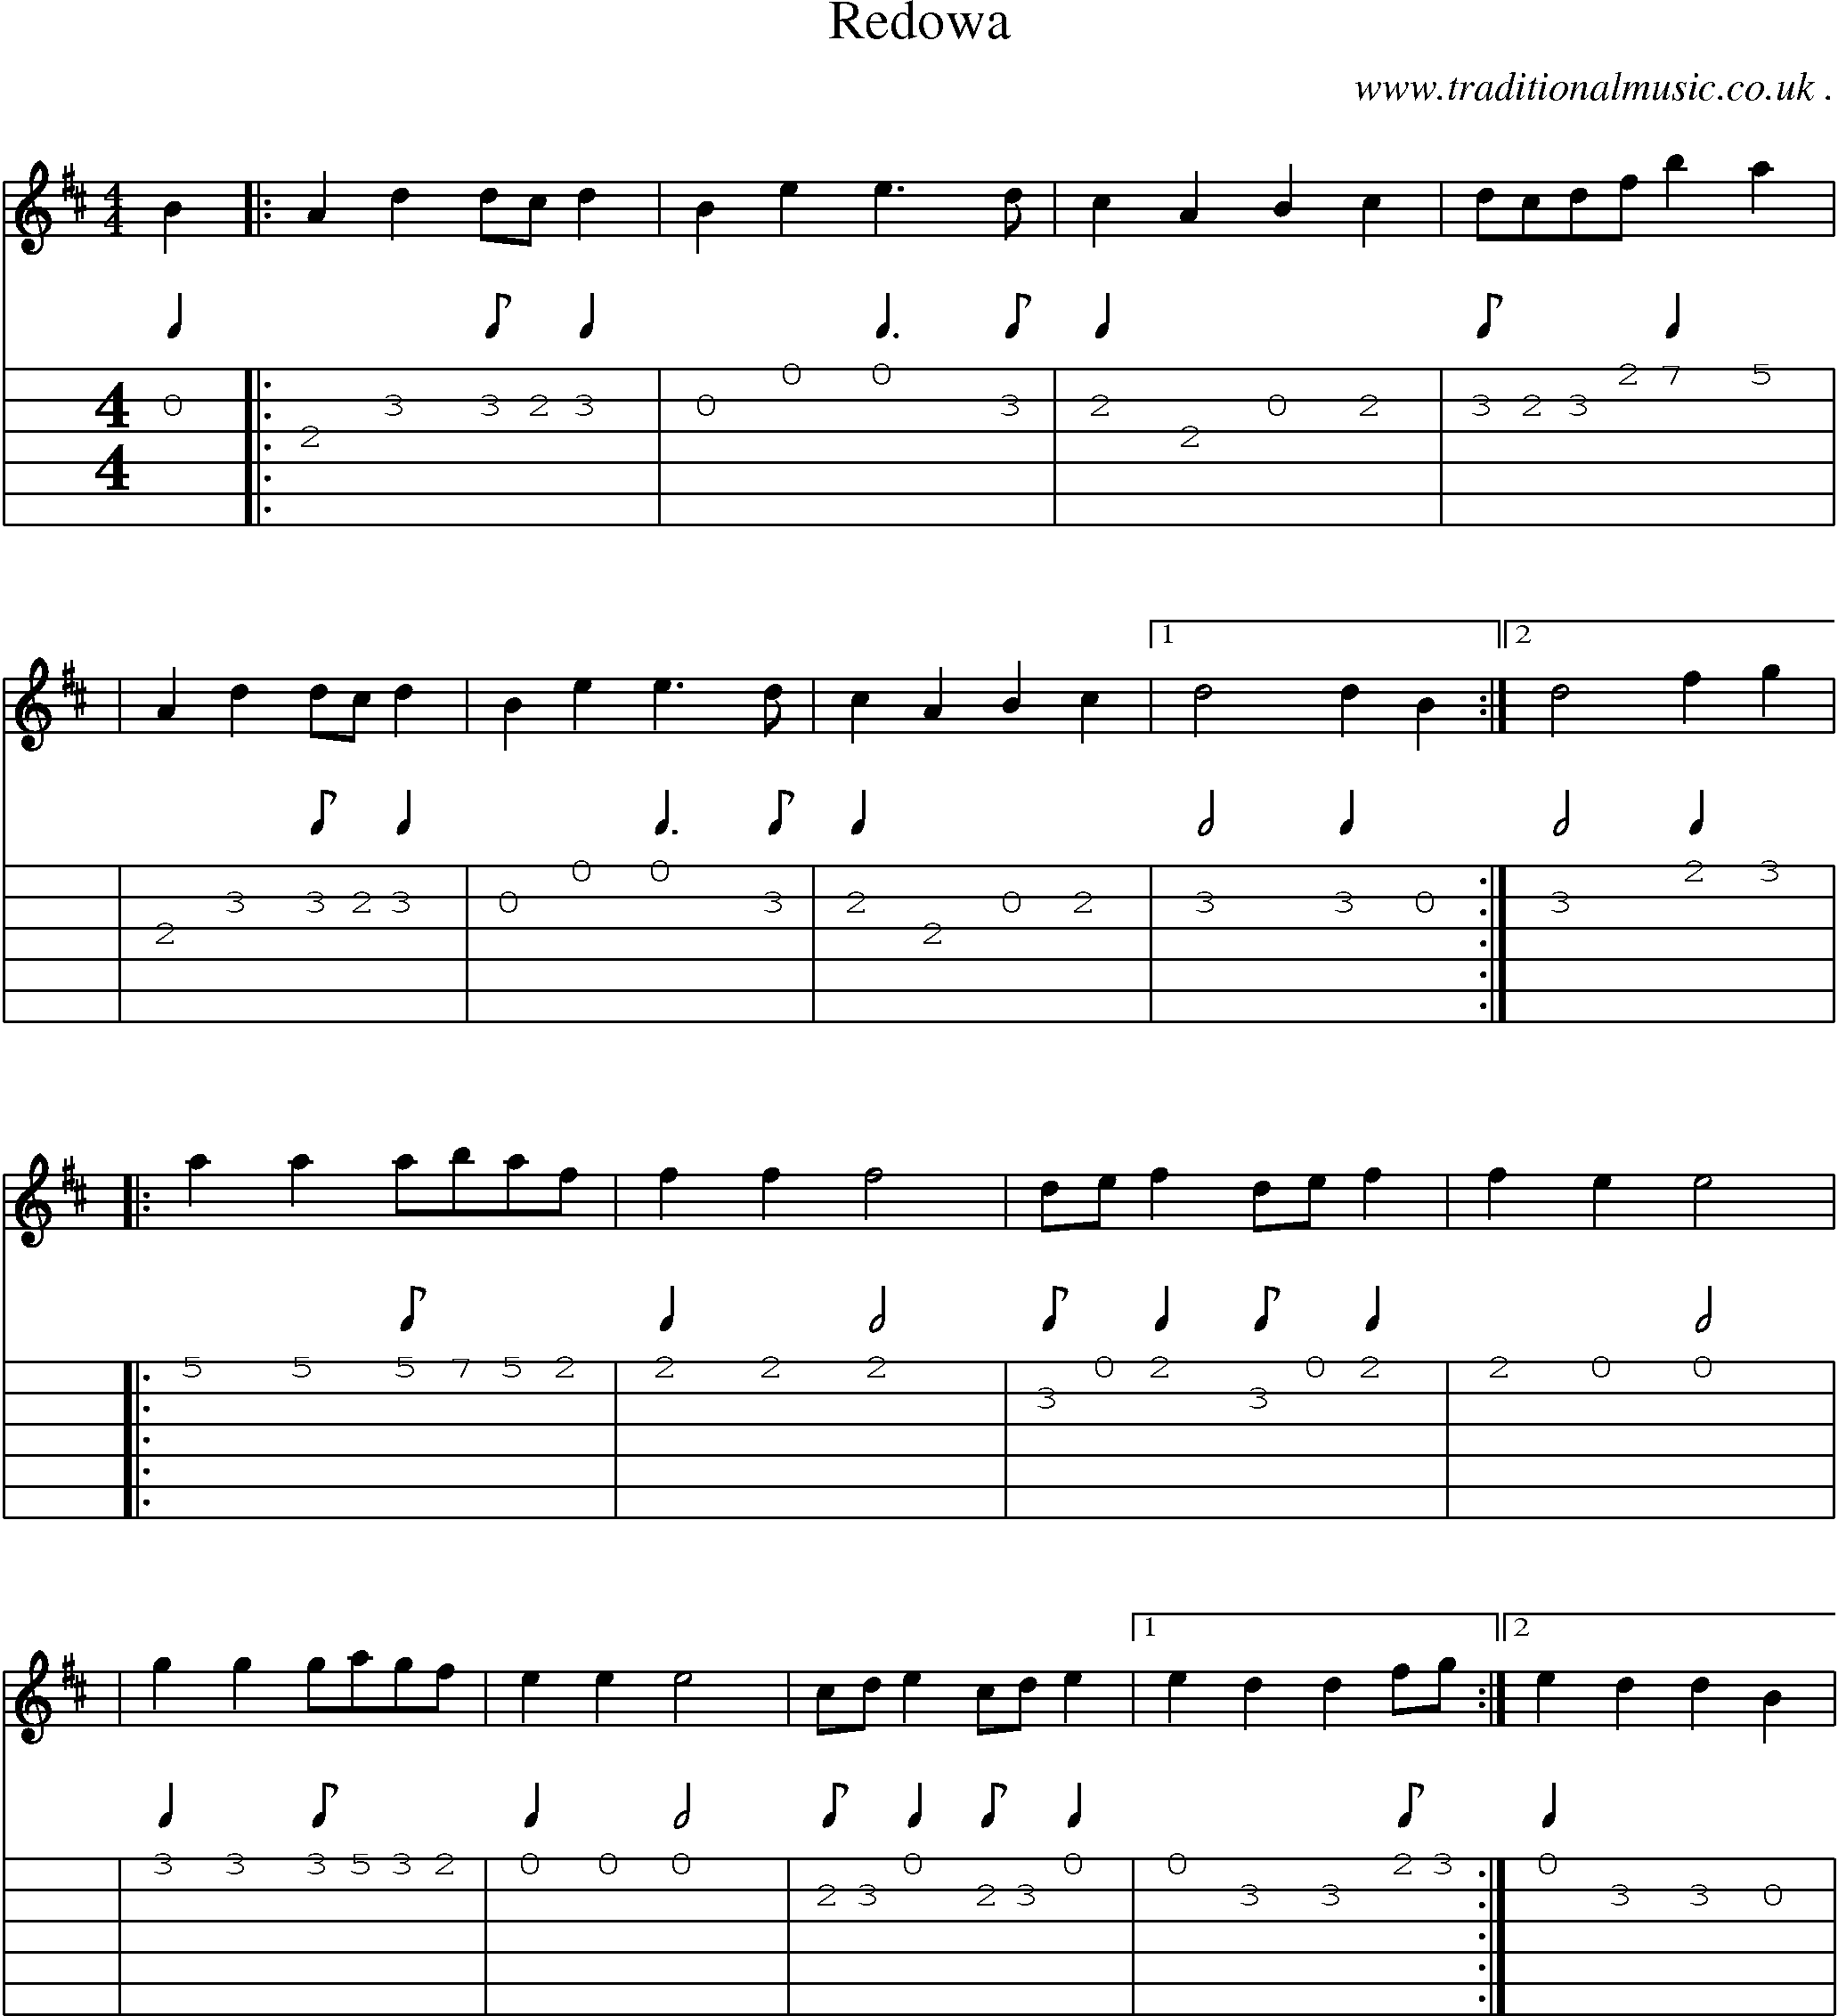 Sheet-Music and Guitar Tabs for Redowa